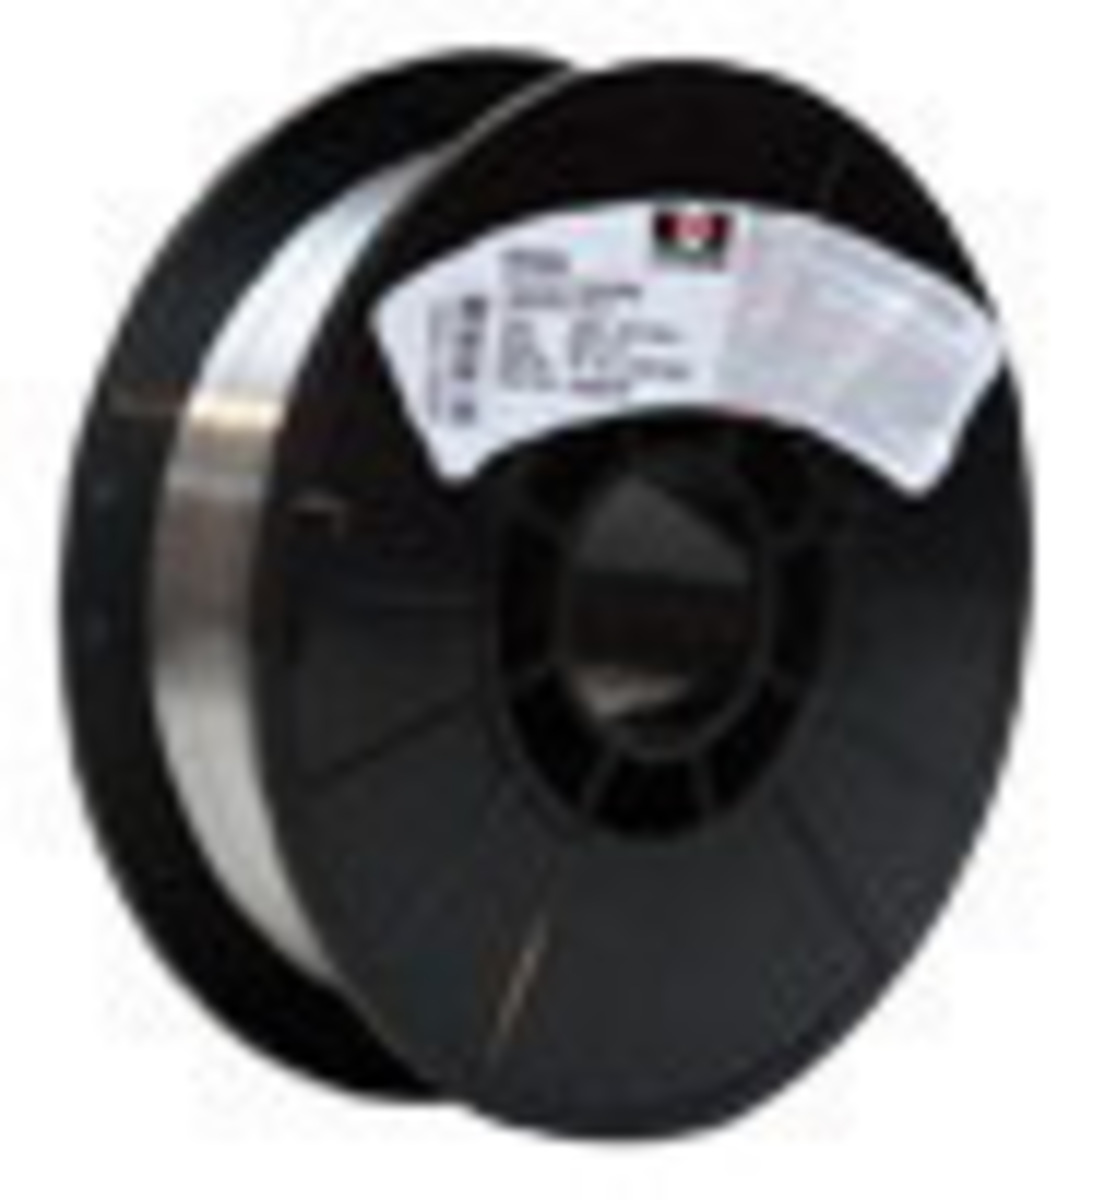 Package The Harris Products Group 0.035 x 36 S/S x 10 lb Harris 308LTF0 308L Welding Wire Package 0.035 x 36 S/S x 10 lb 